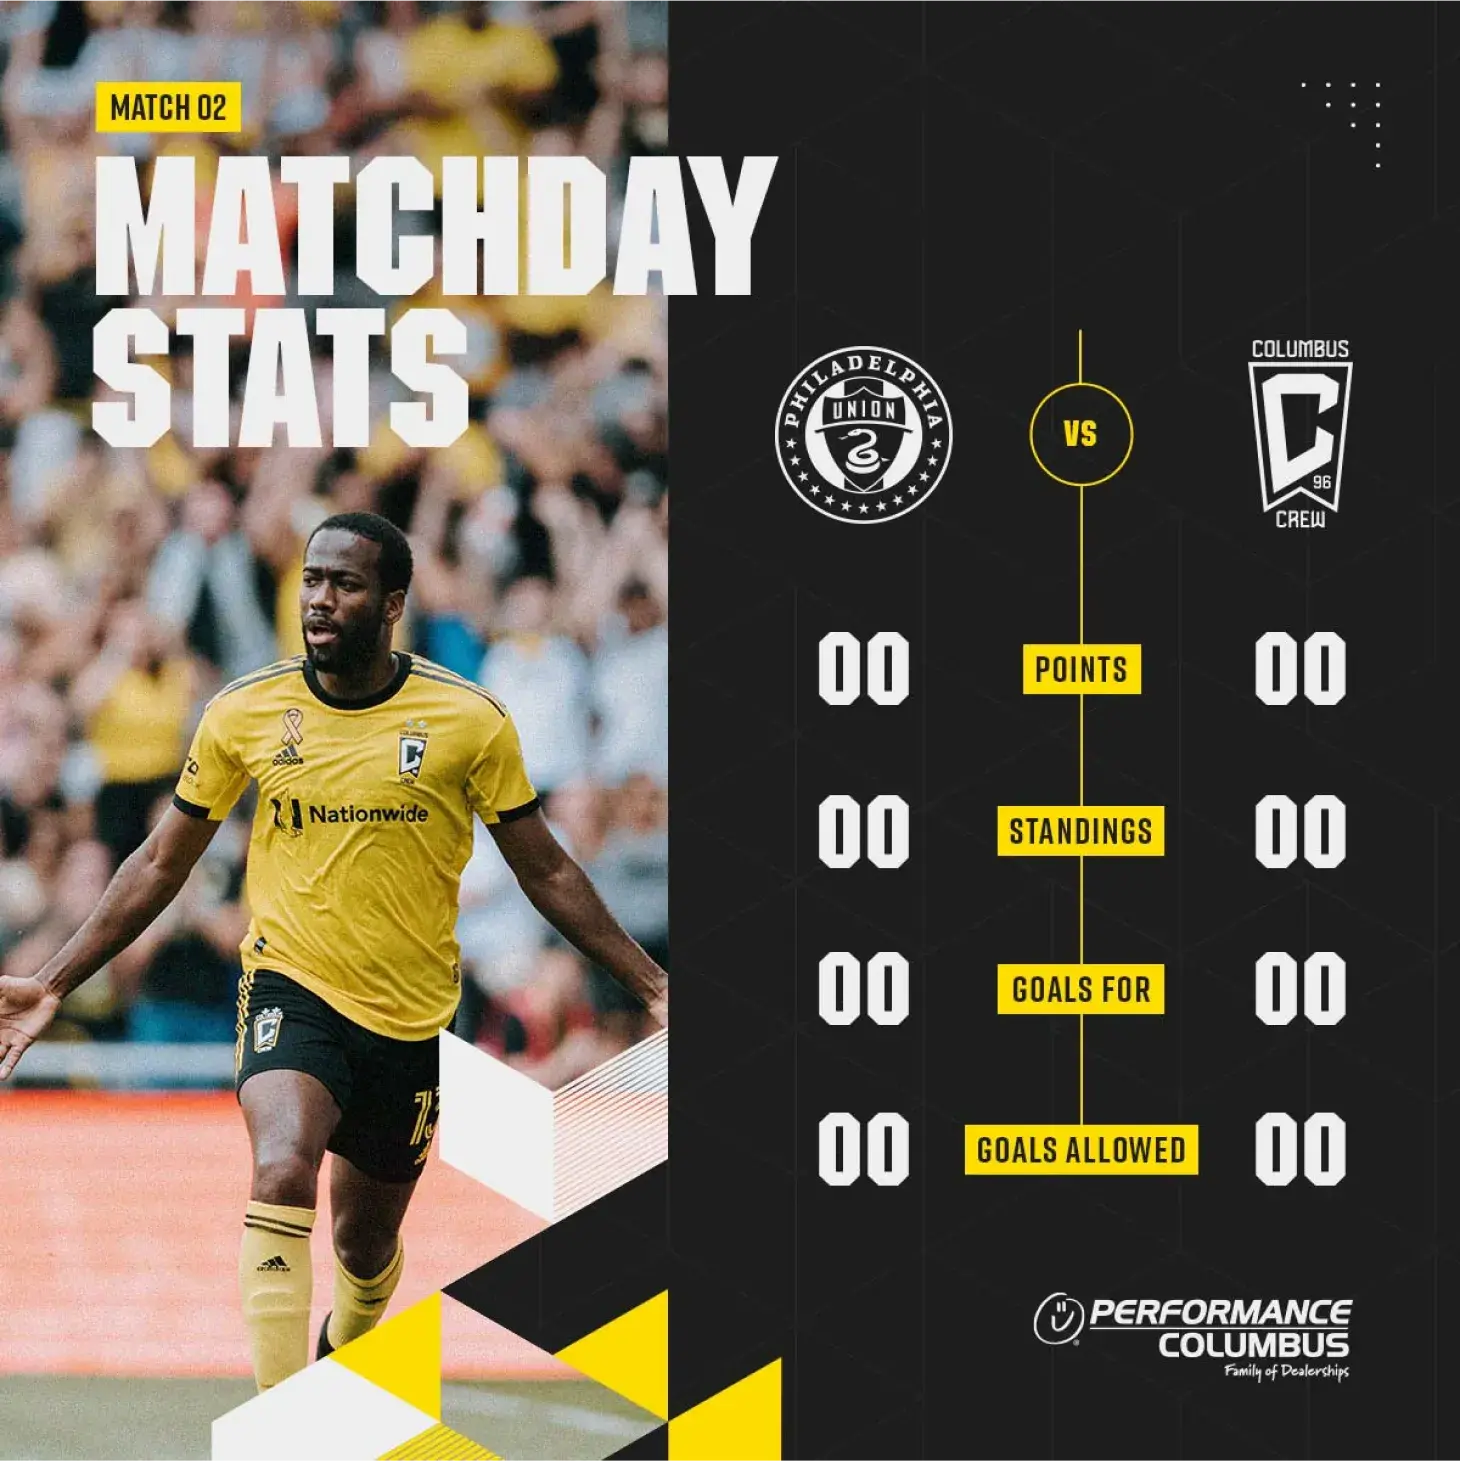 Matchday stats featuring Crew player with his arms outstretched